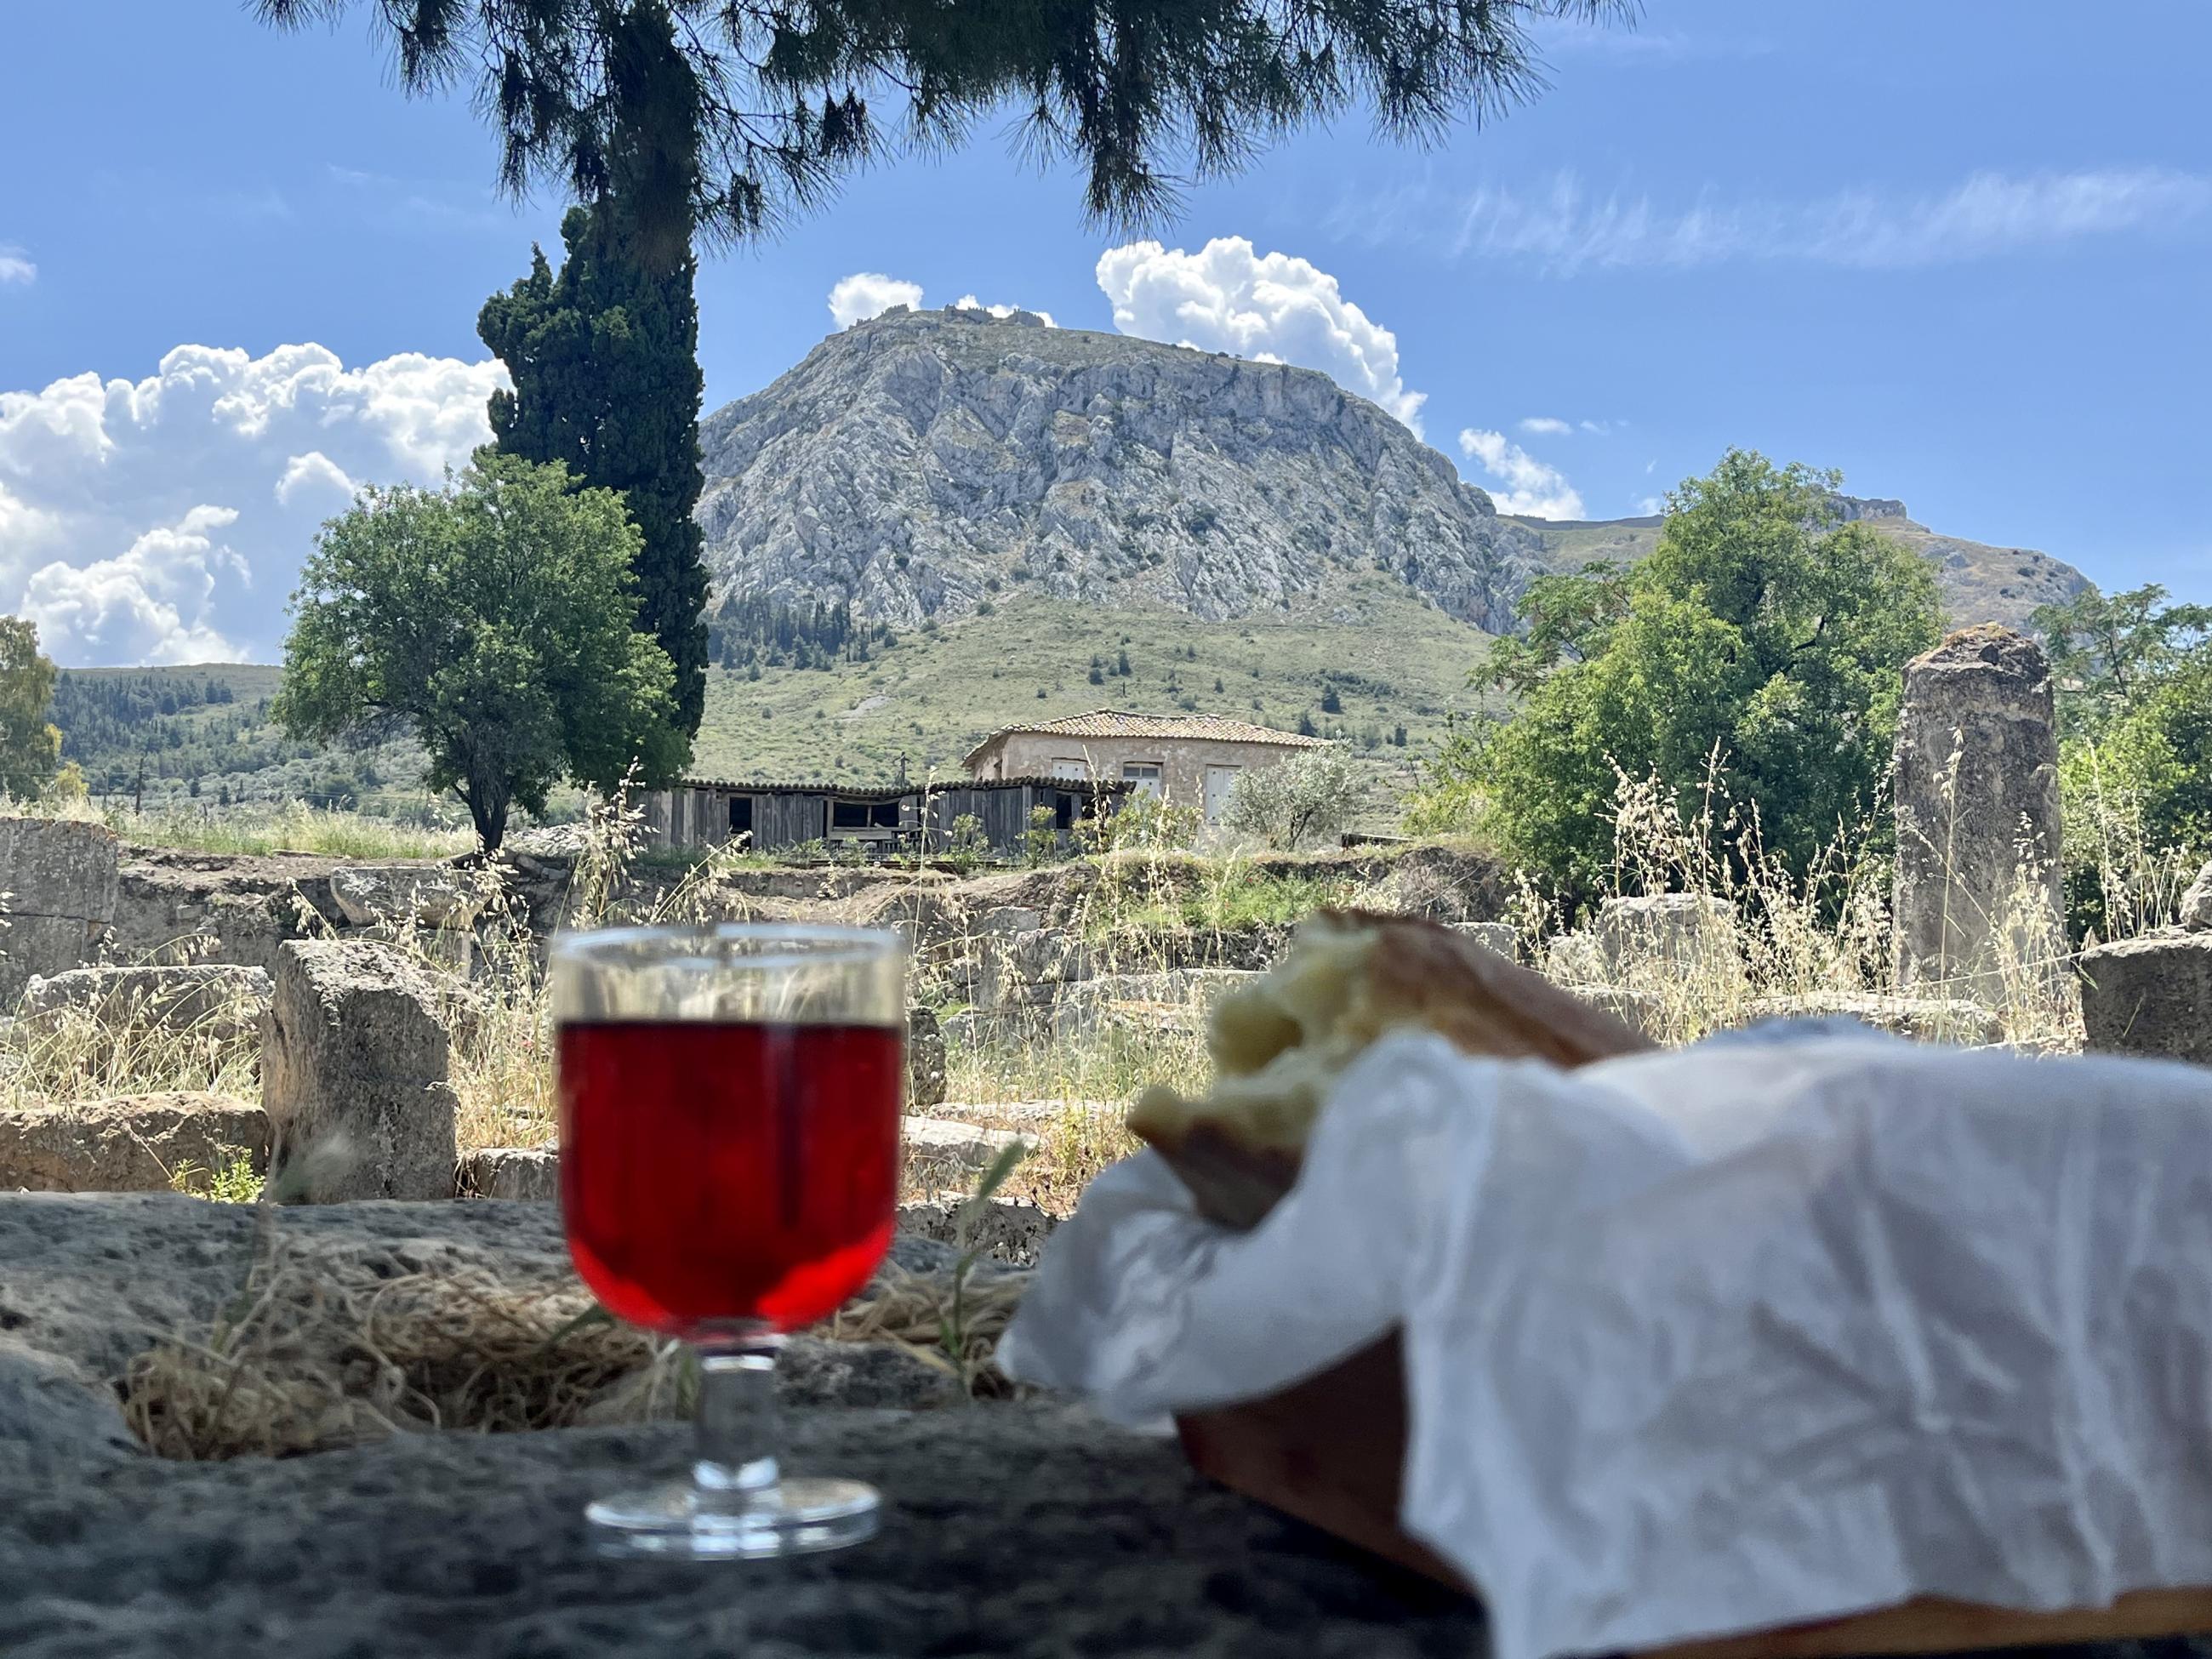 Sumpter documents Communion in Corinth, Greece, with the Acrocorinth in the background. 